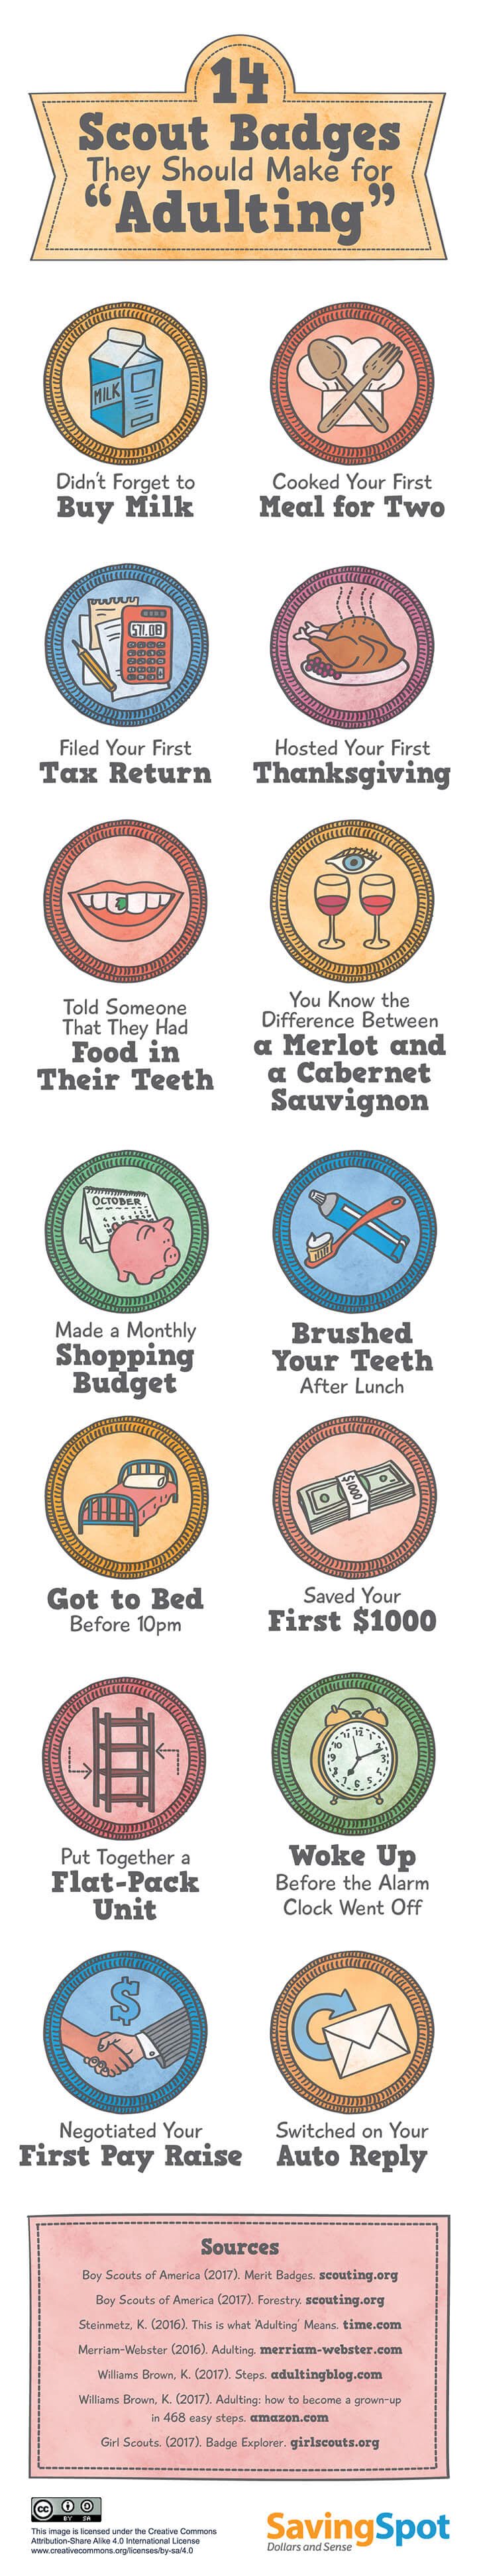 14 Scout Badges They Should Make for “Adulting”